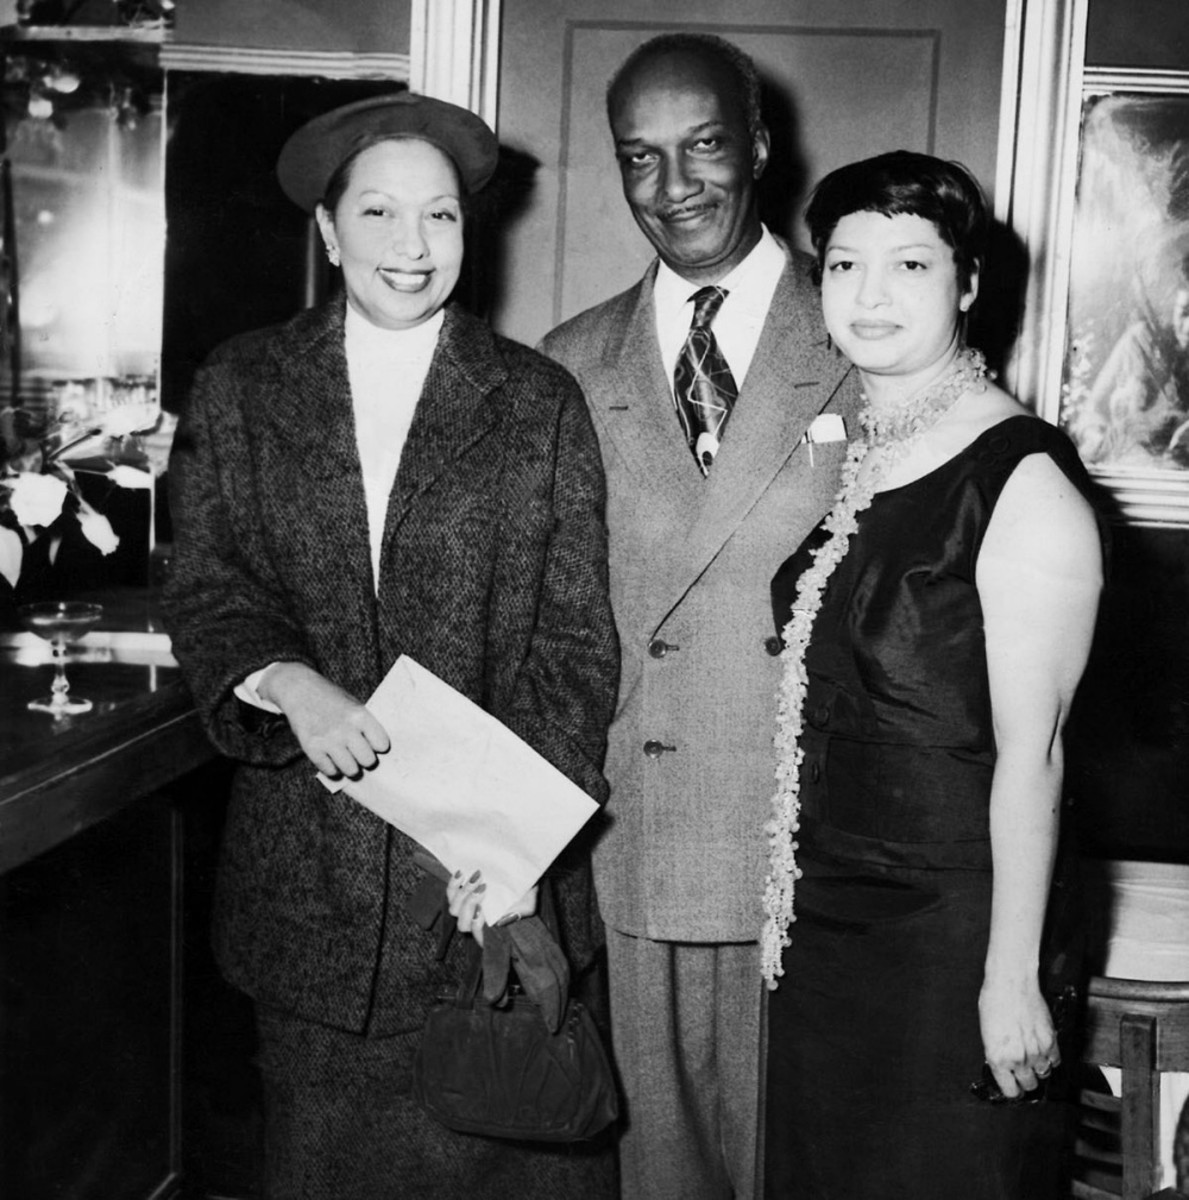 Leola King (right) with Josephine Baker (far left) and an unidentified man